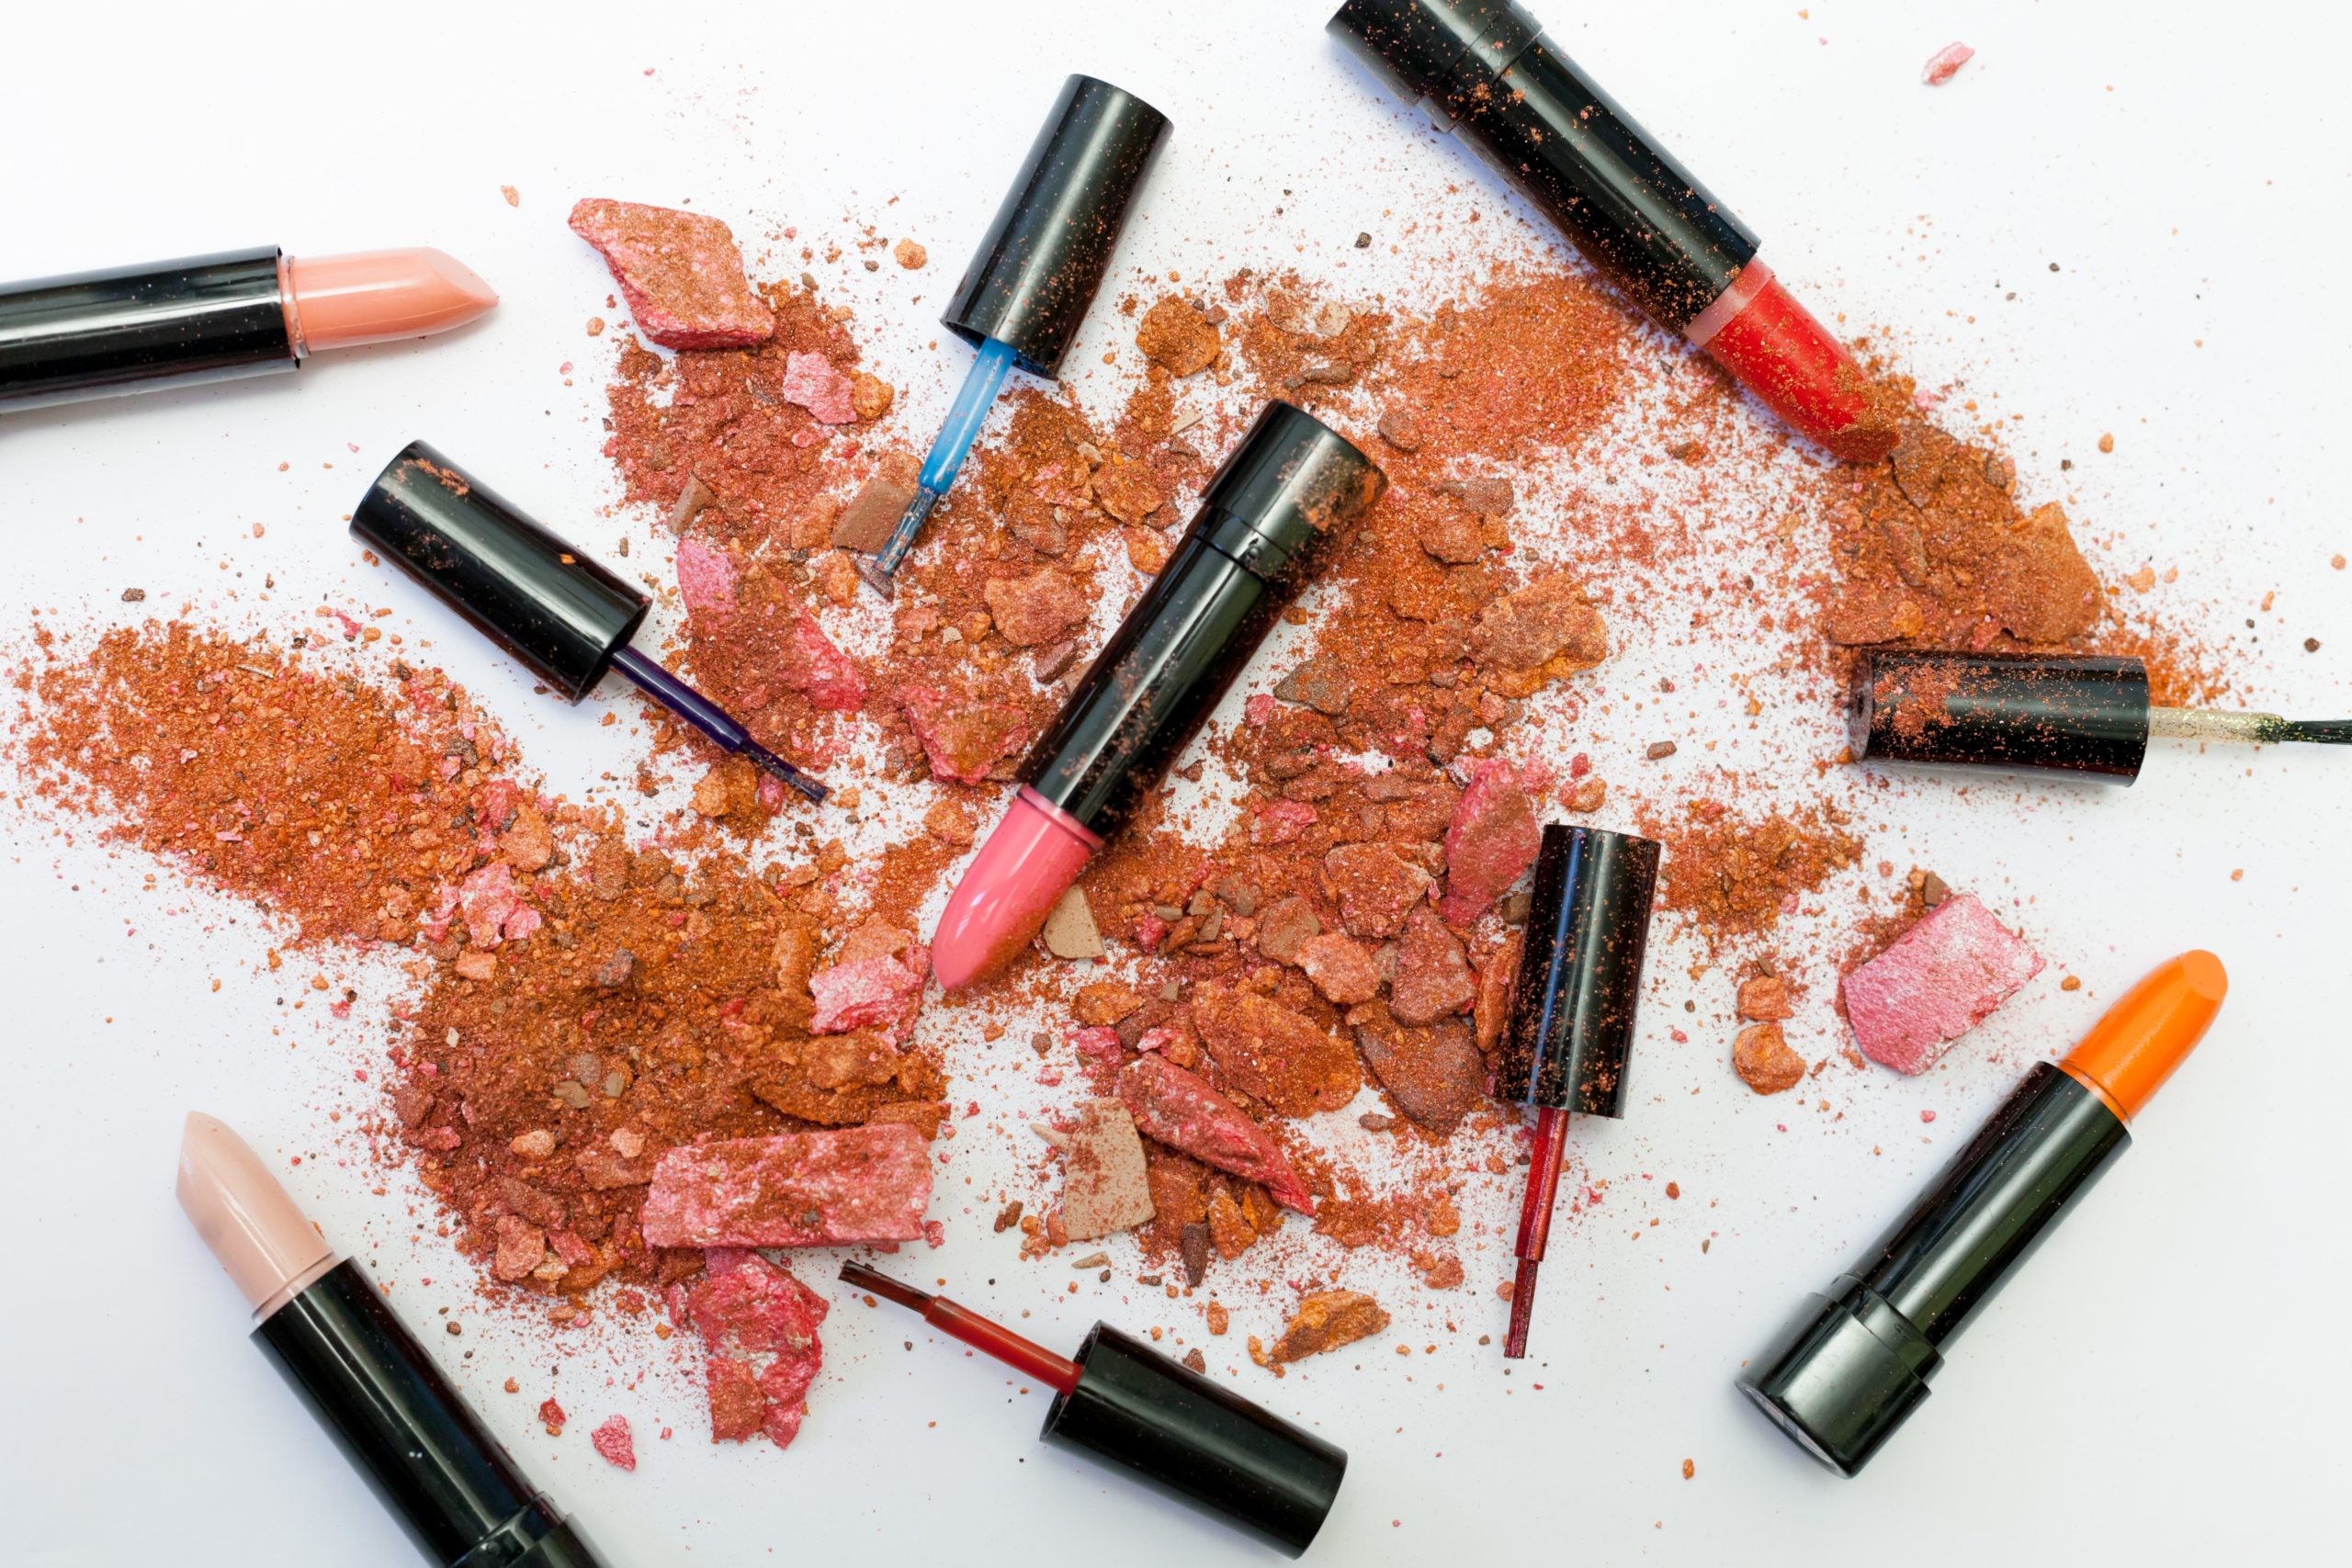 Broken makeup powders and colorful lipsticks in front of a white background